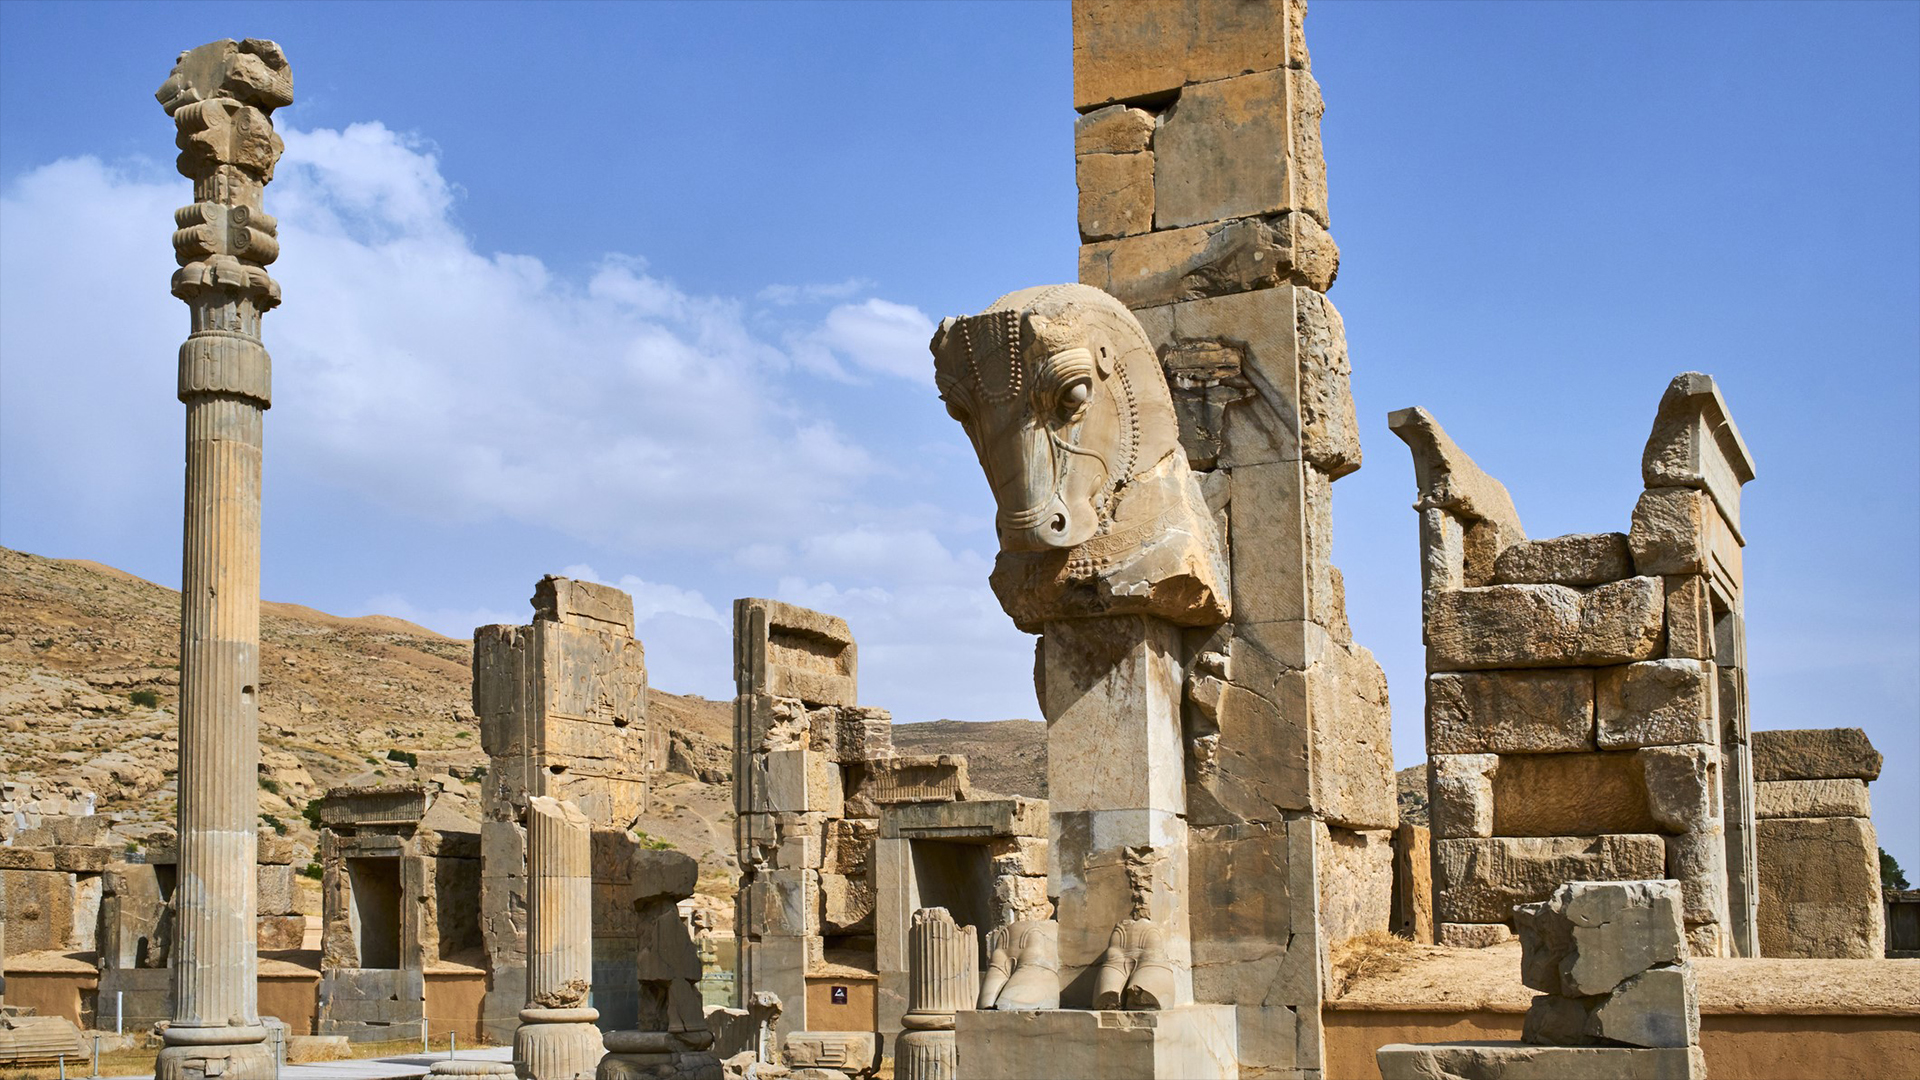 In 2034, a total solar eclipse will occur above Persepolis, a UNESCO World Heritage site in Iran.